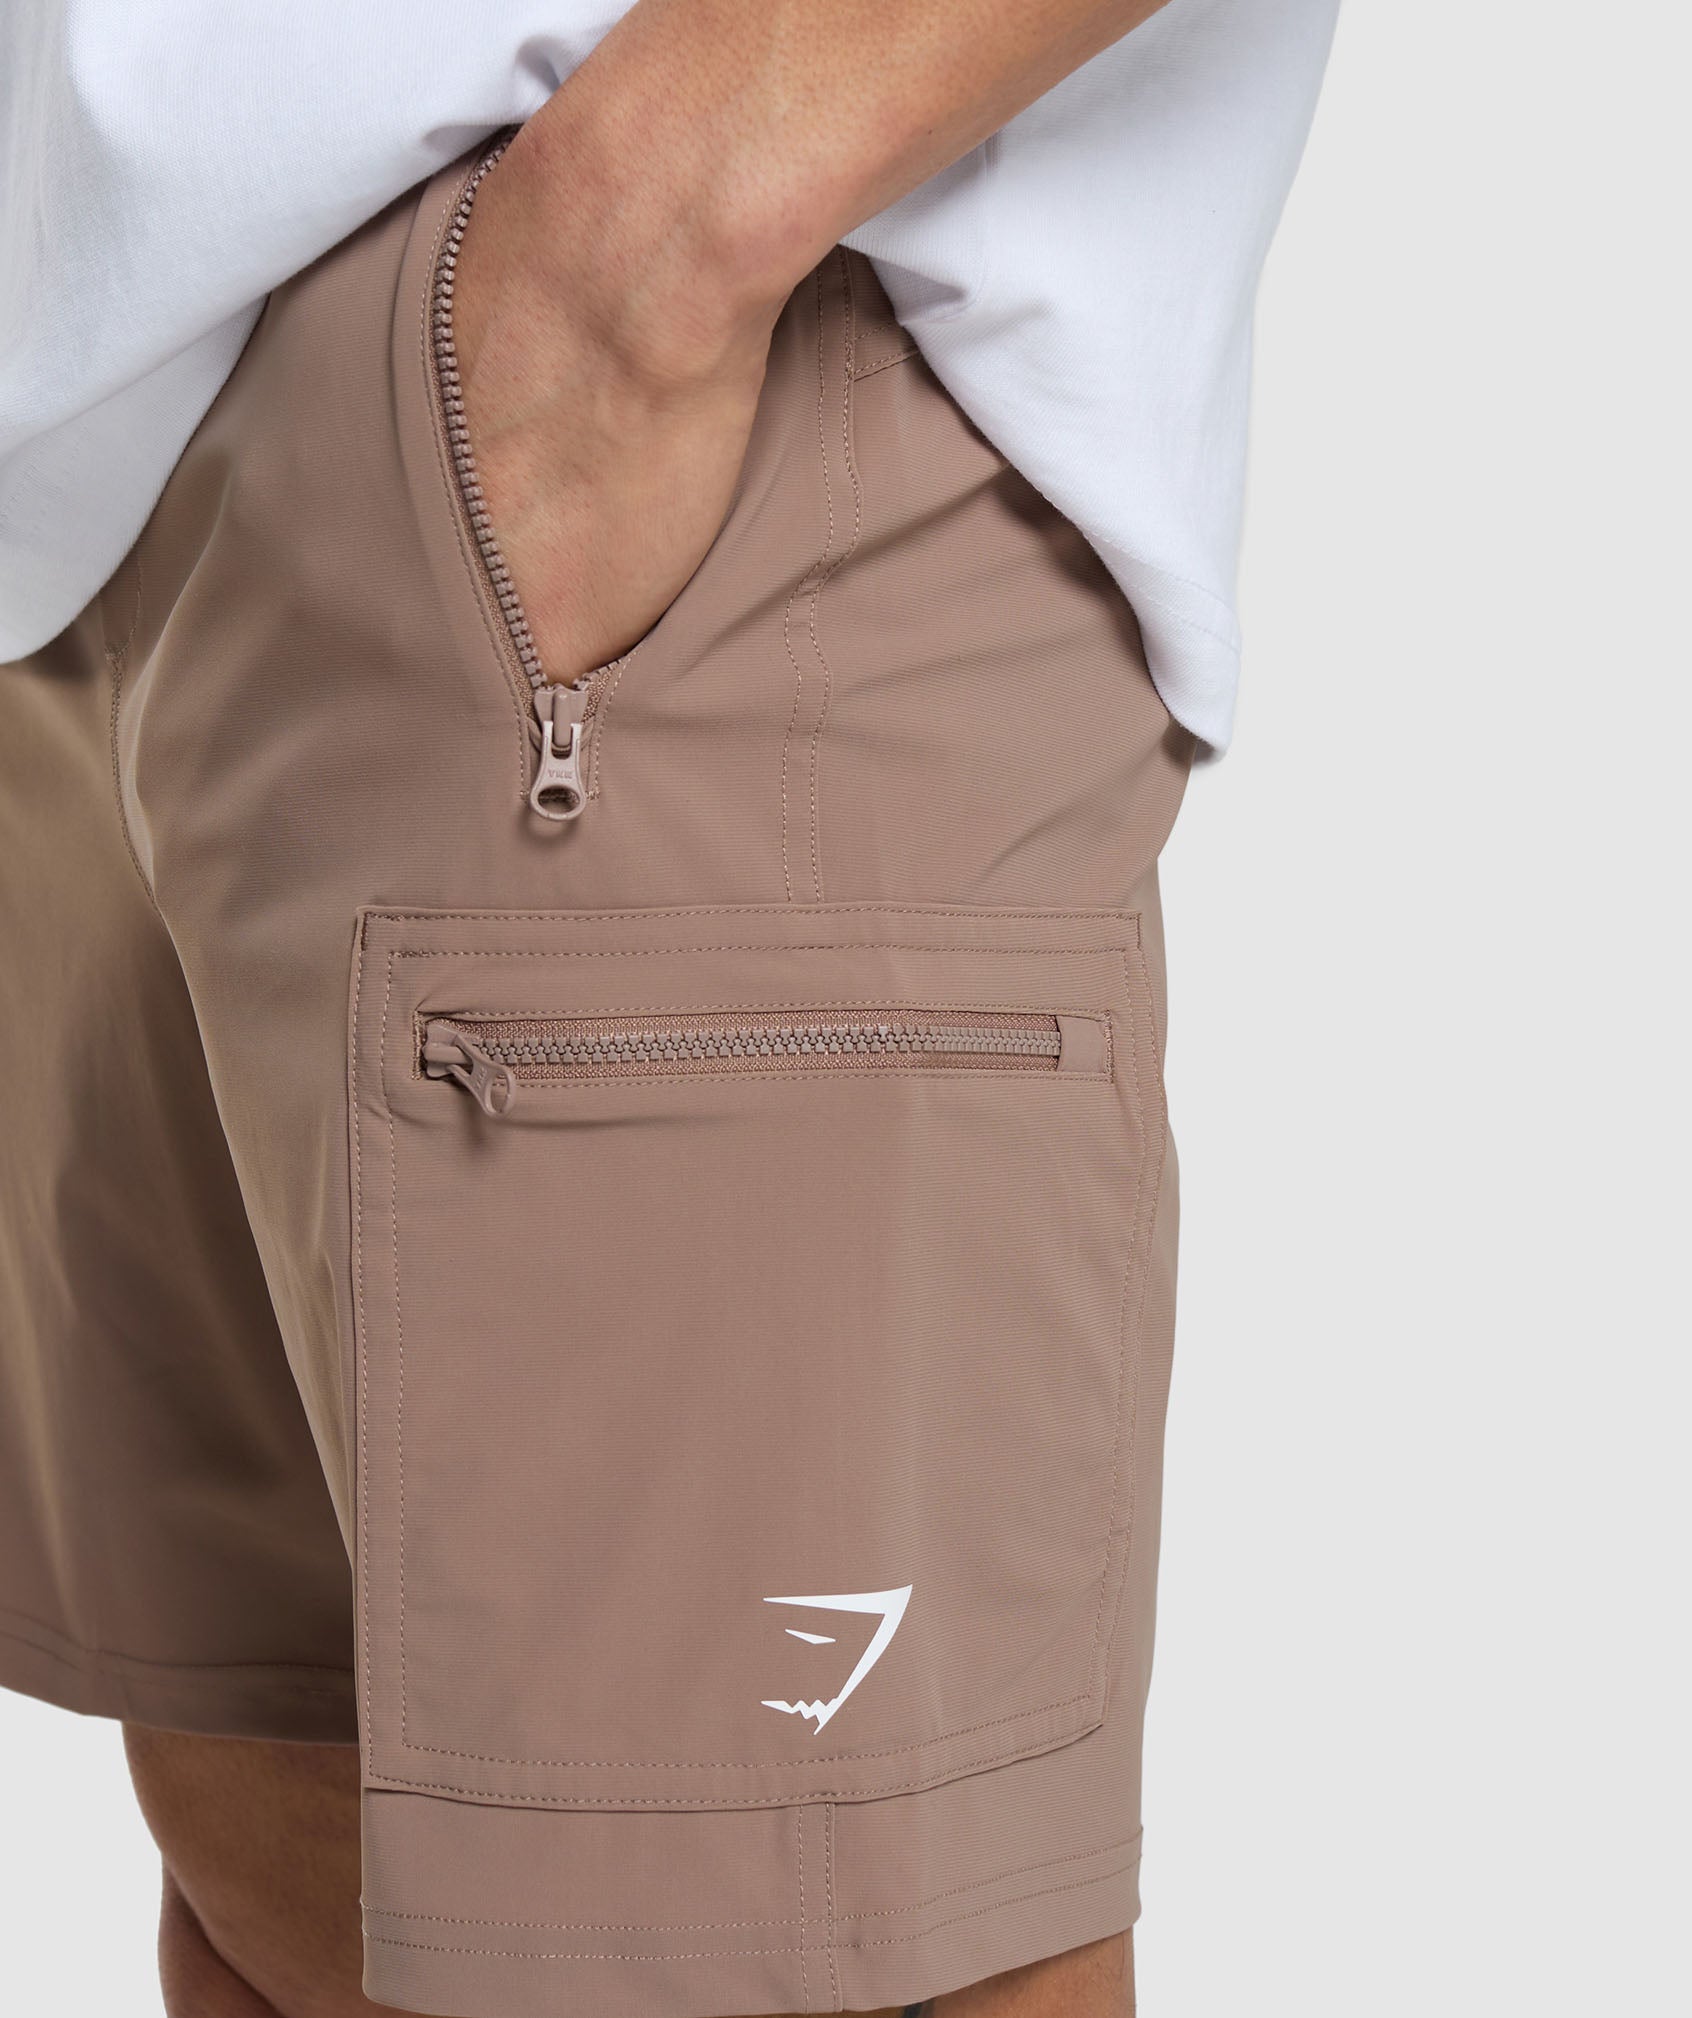 Rest Day 6" Cargo Shorts in Mocha Mauve - view 6